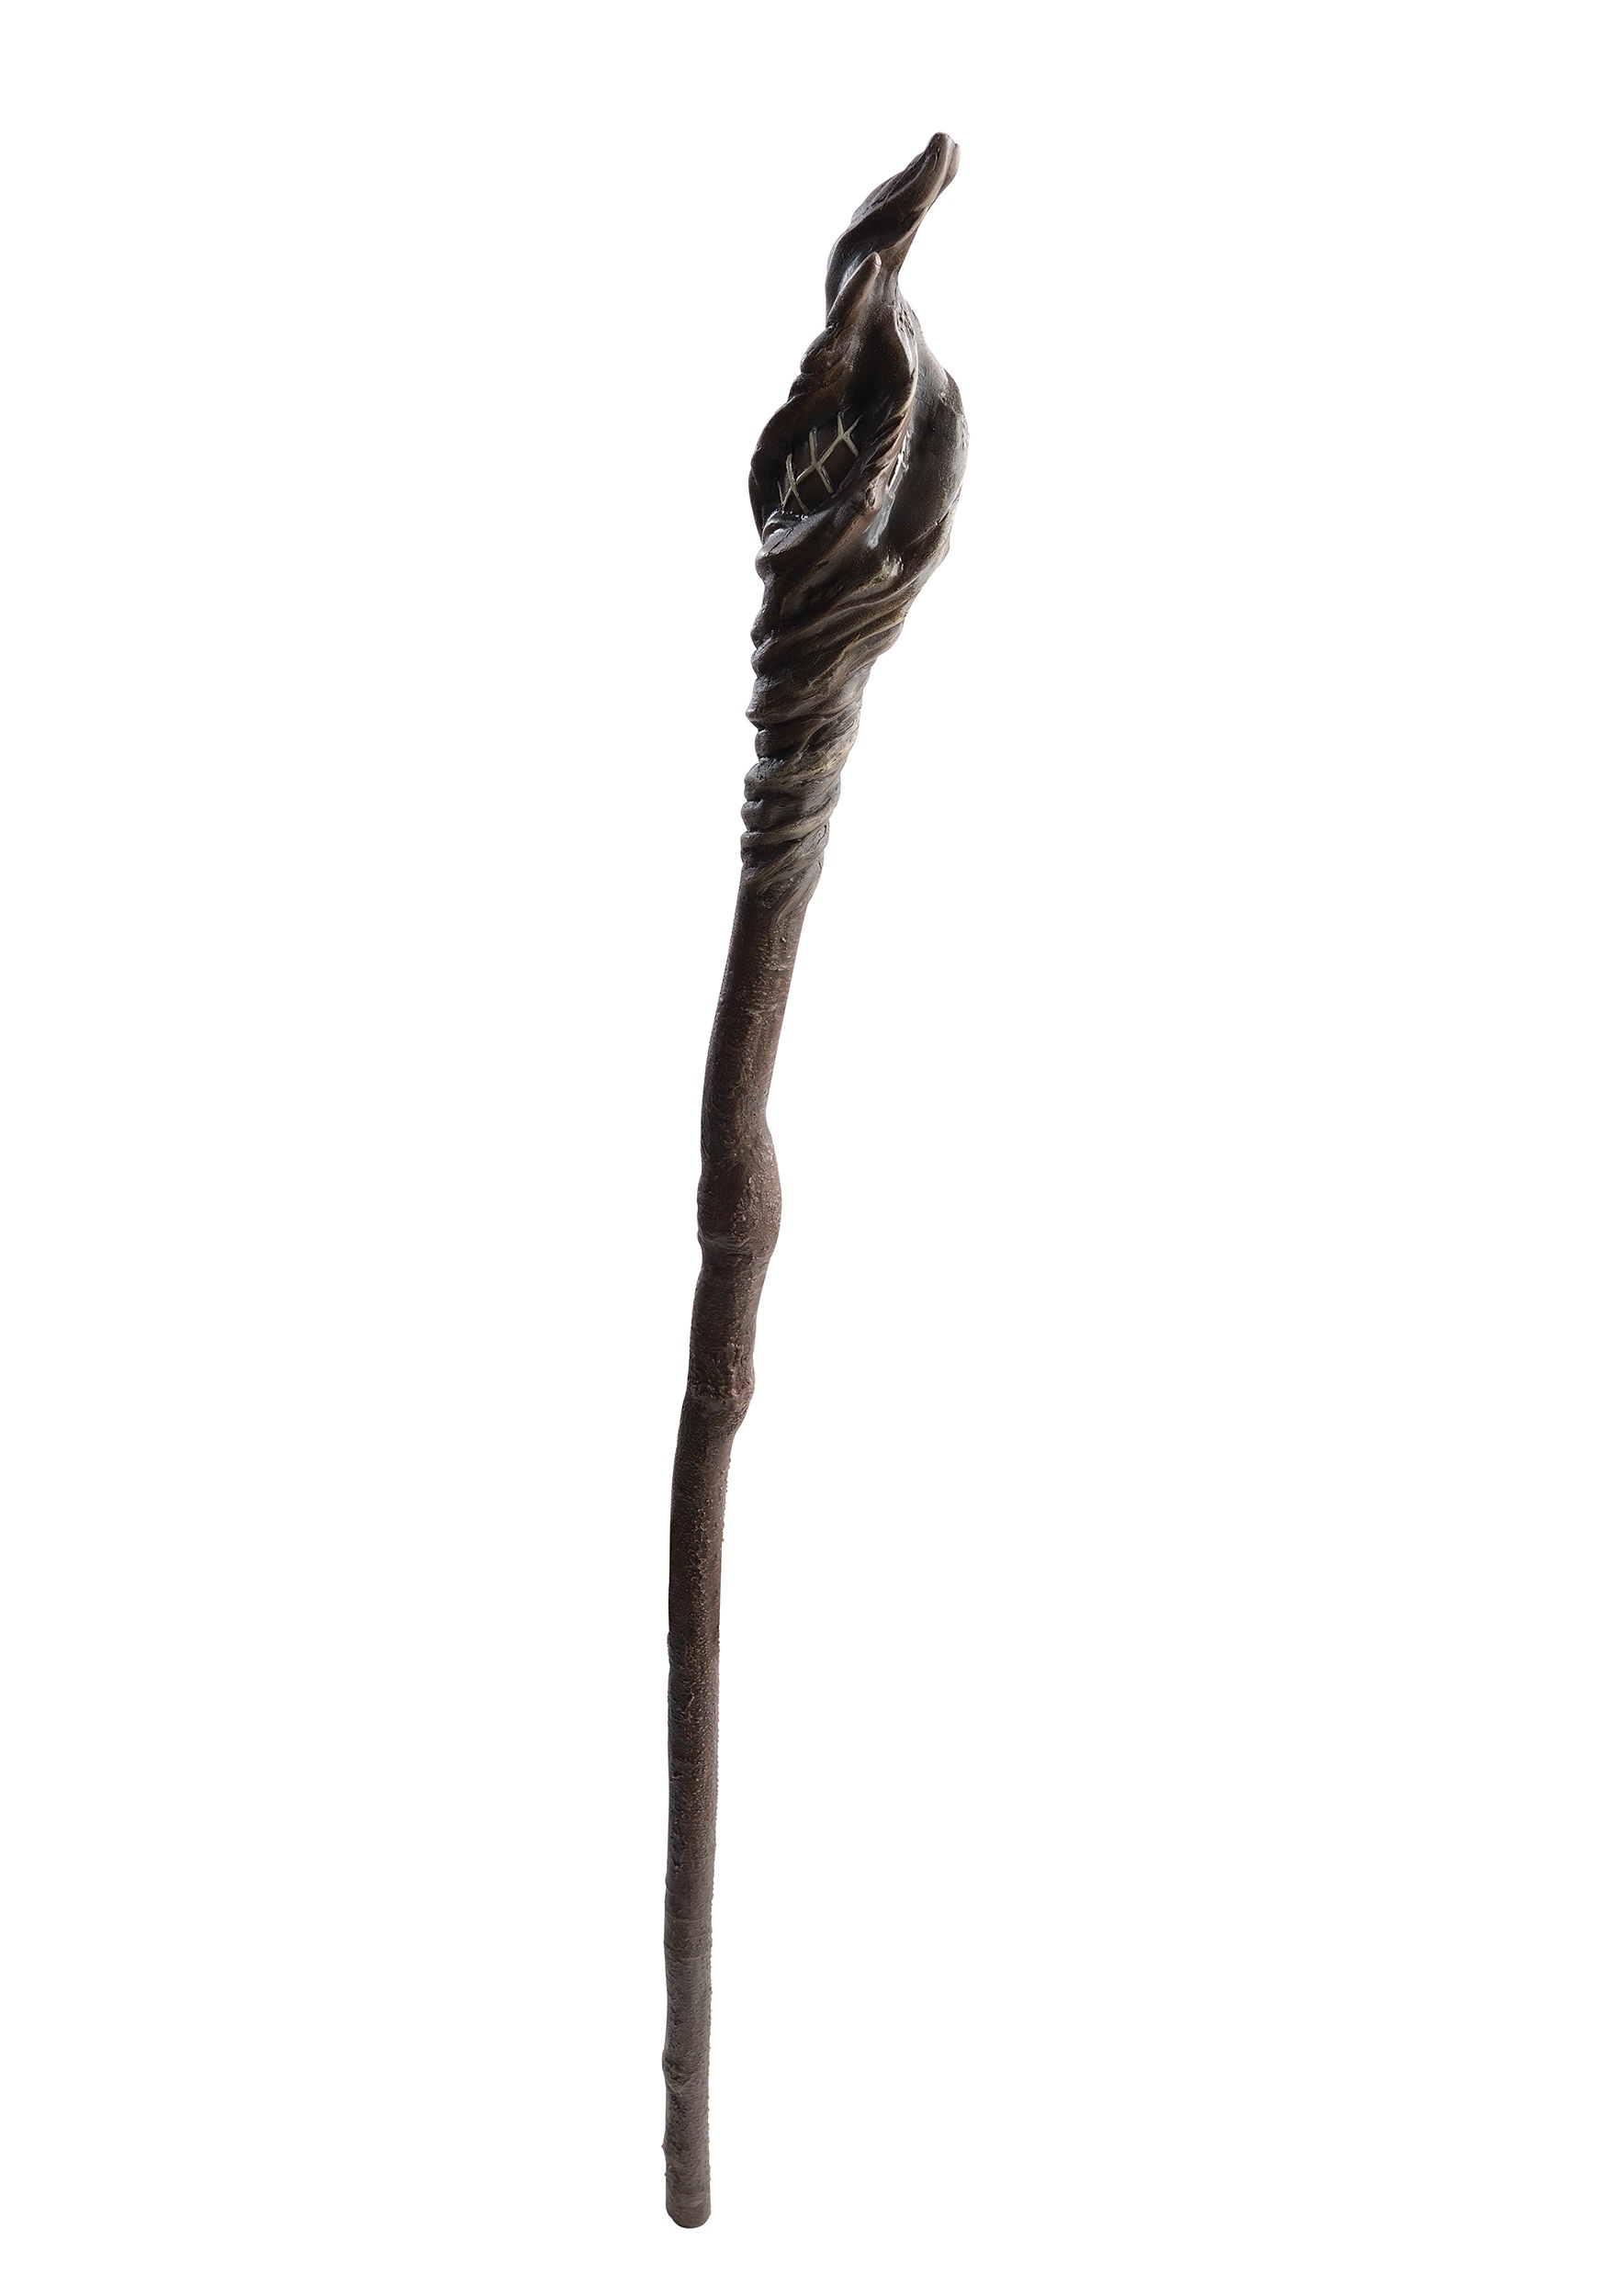 Lord of the Rings Gandalf Staff